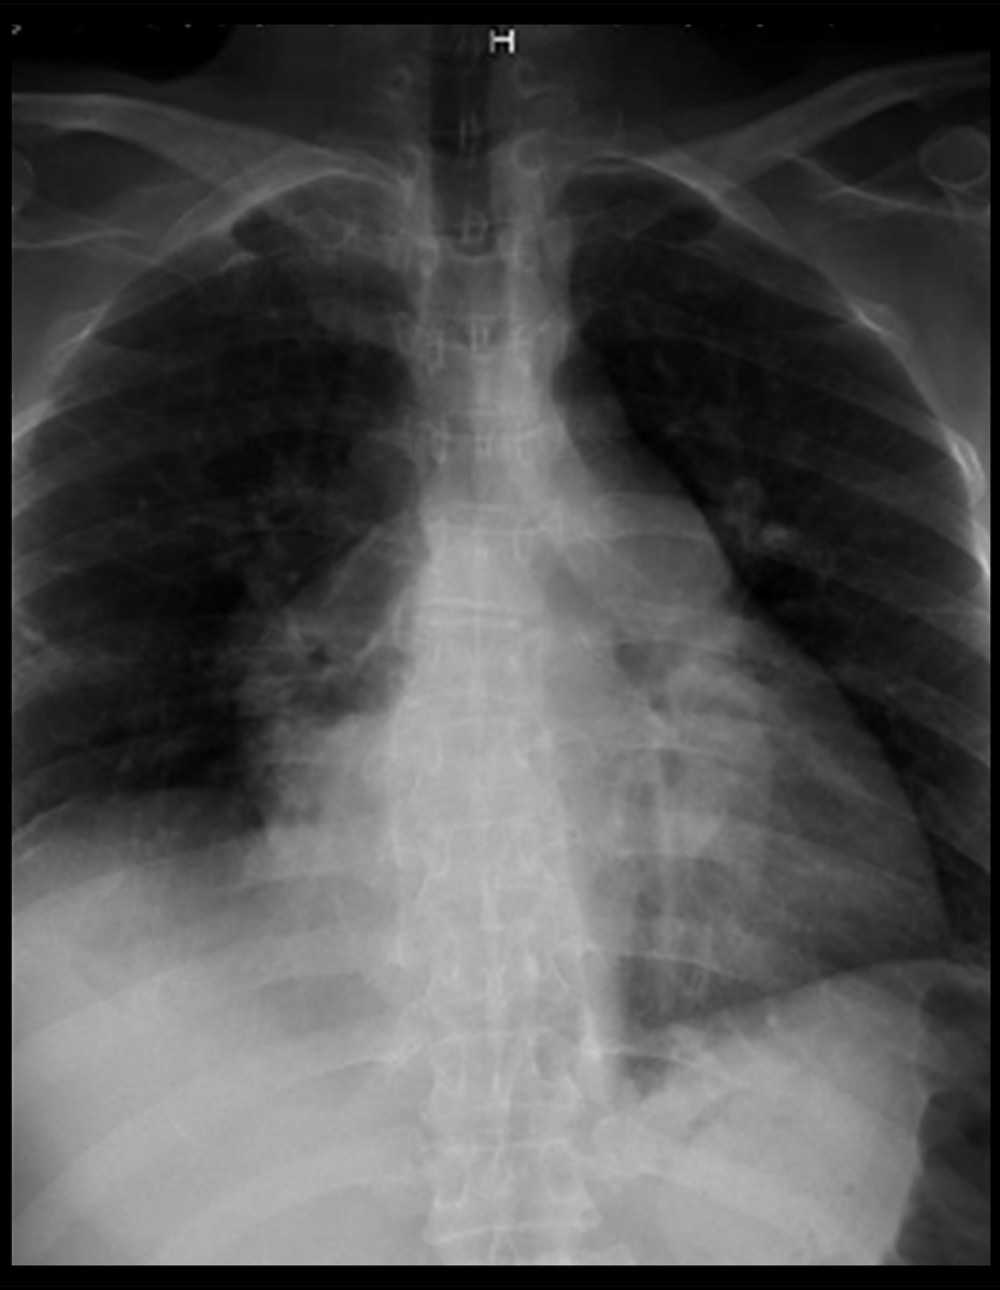 Chest radiography showing enlarged pulmonary tract and dilation of the right ventricle.